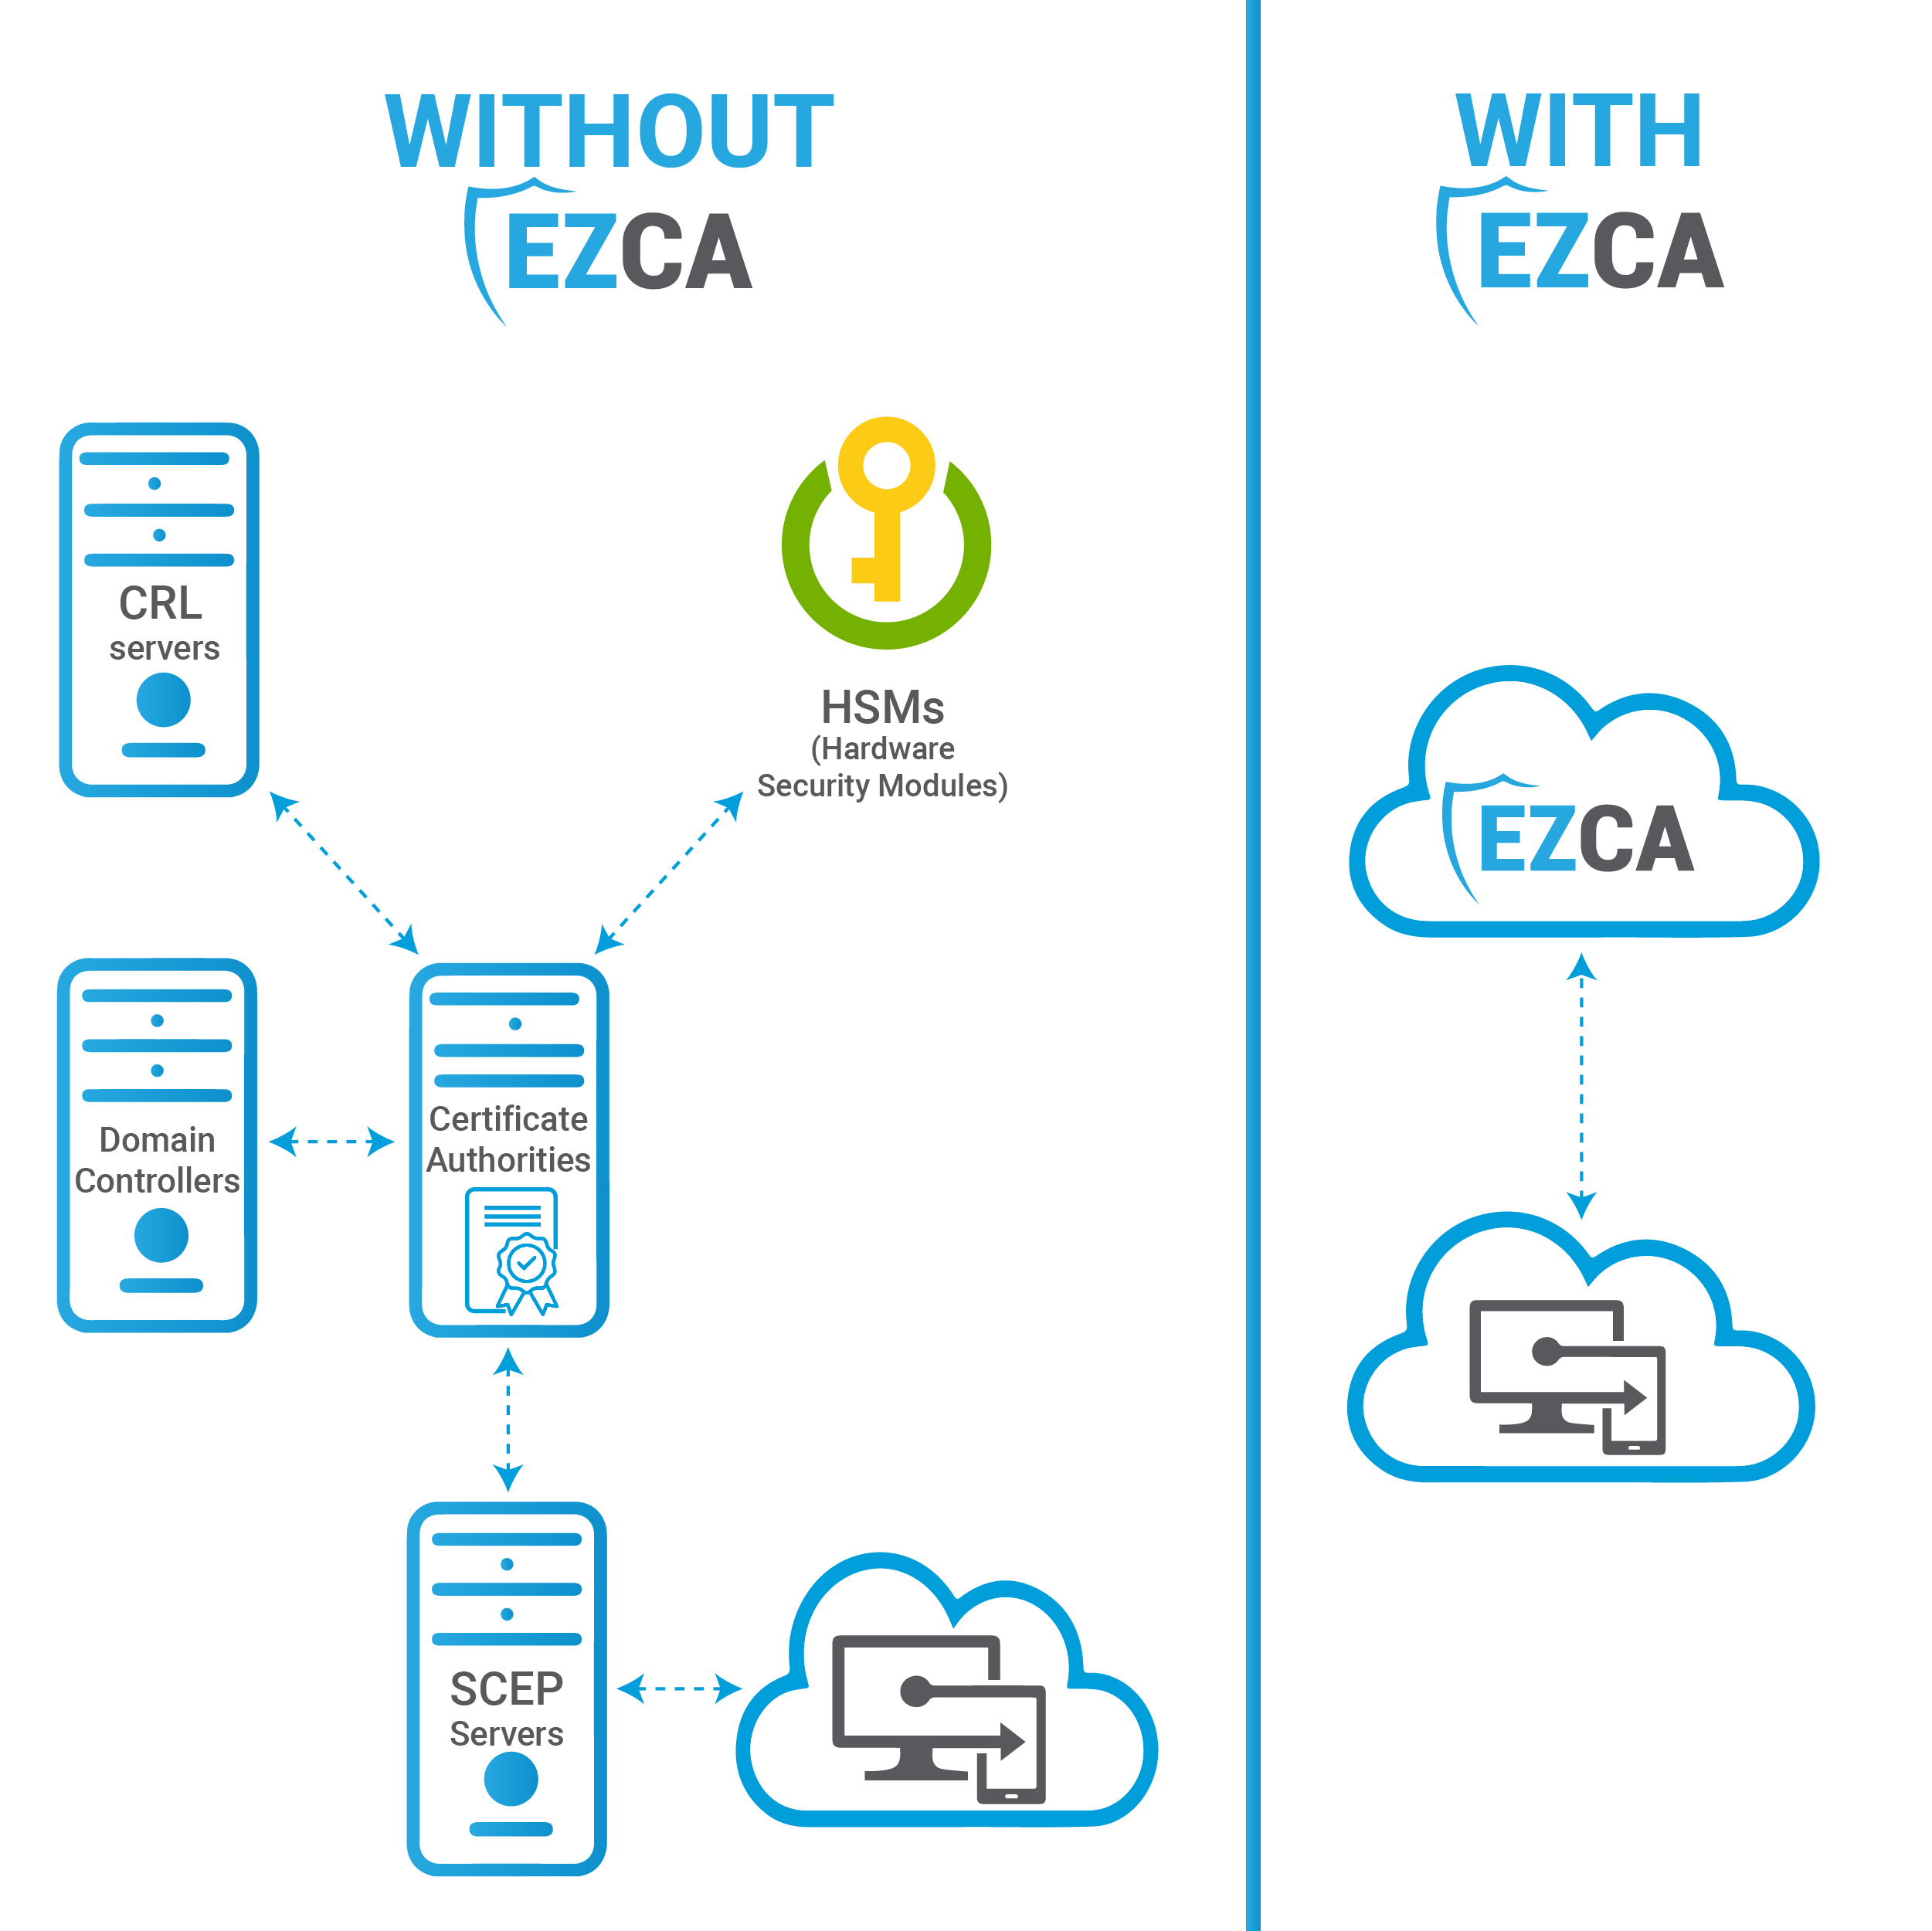 How to Create a Certificate Authority for Intune With EZCA and Without EZCA